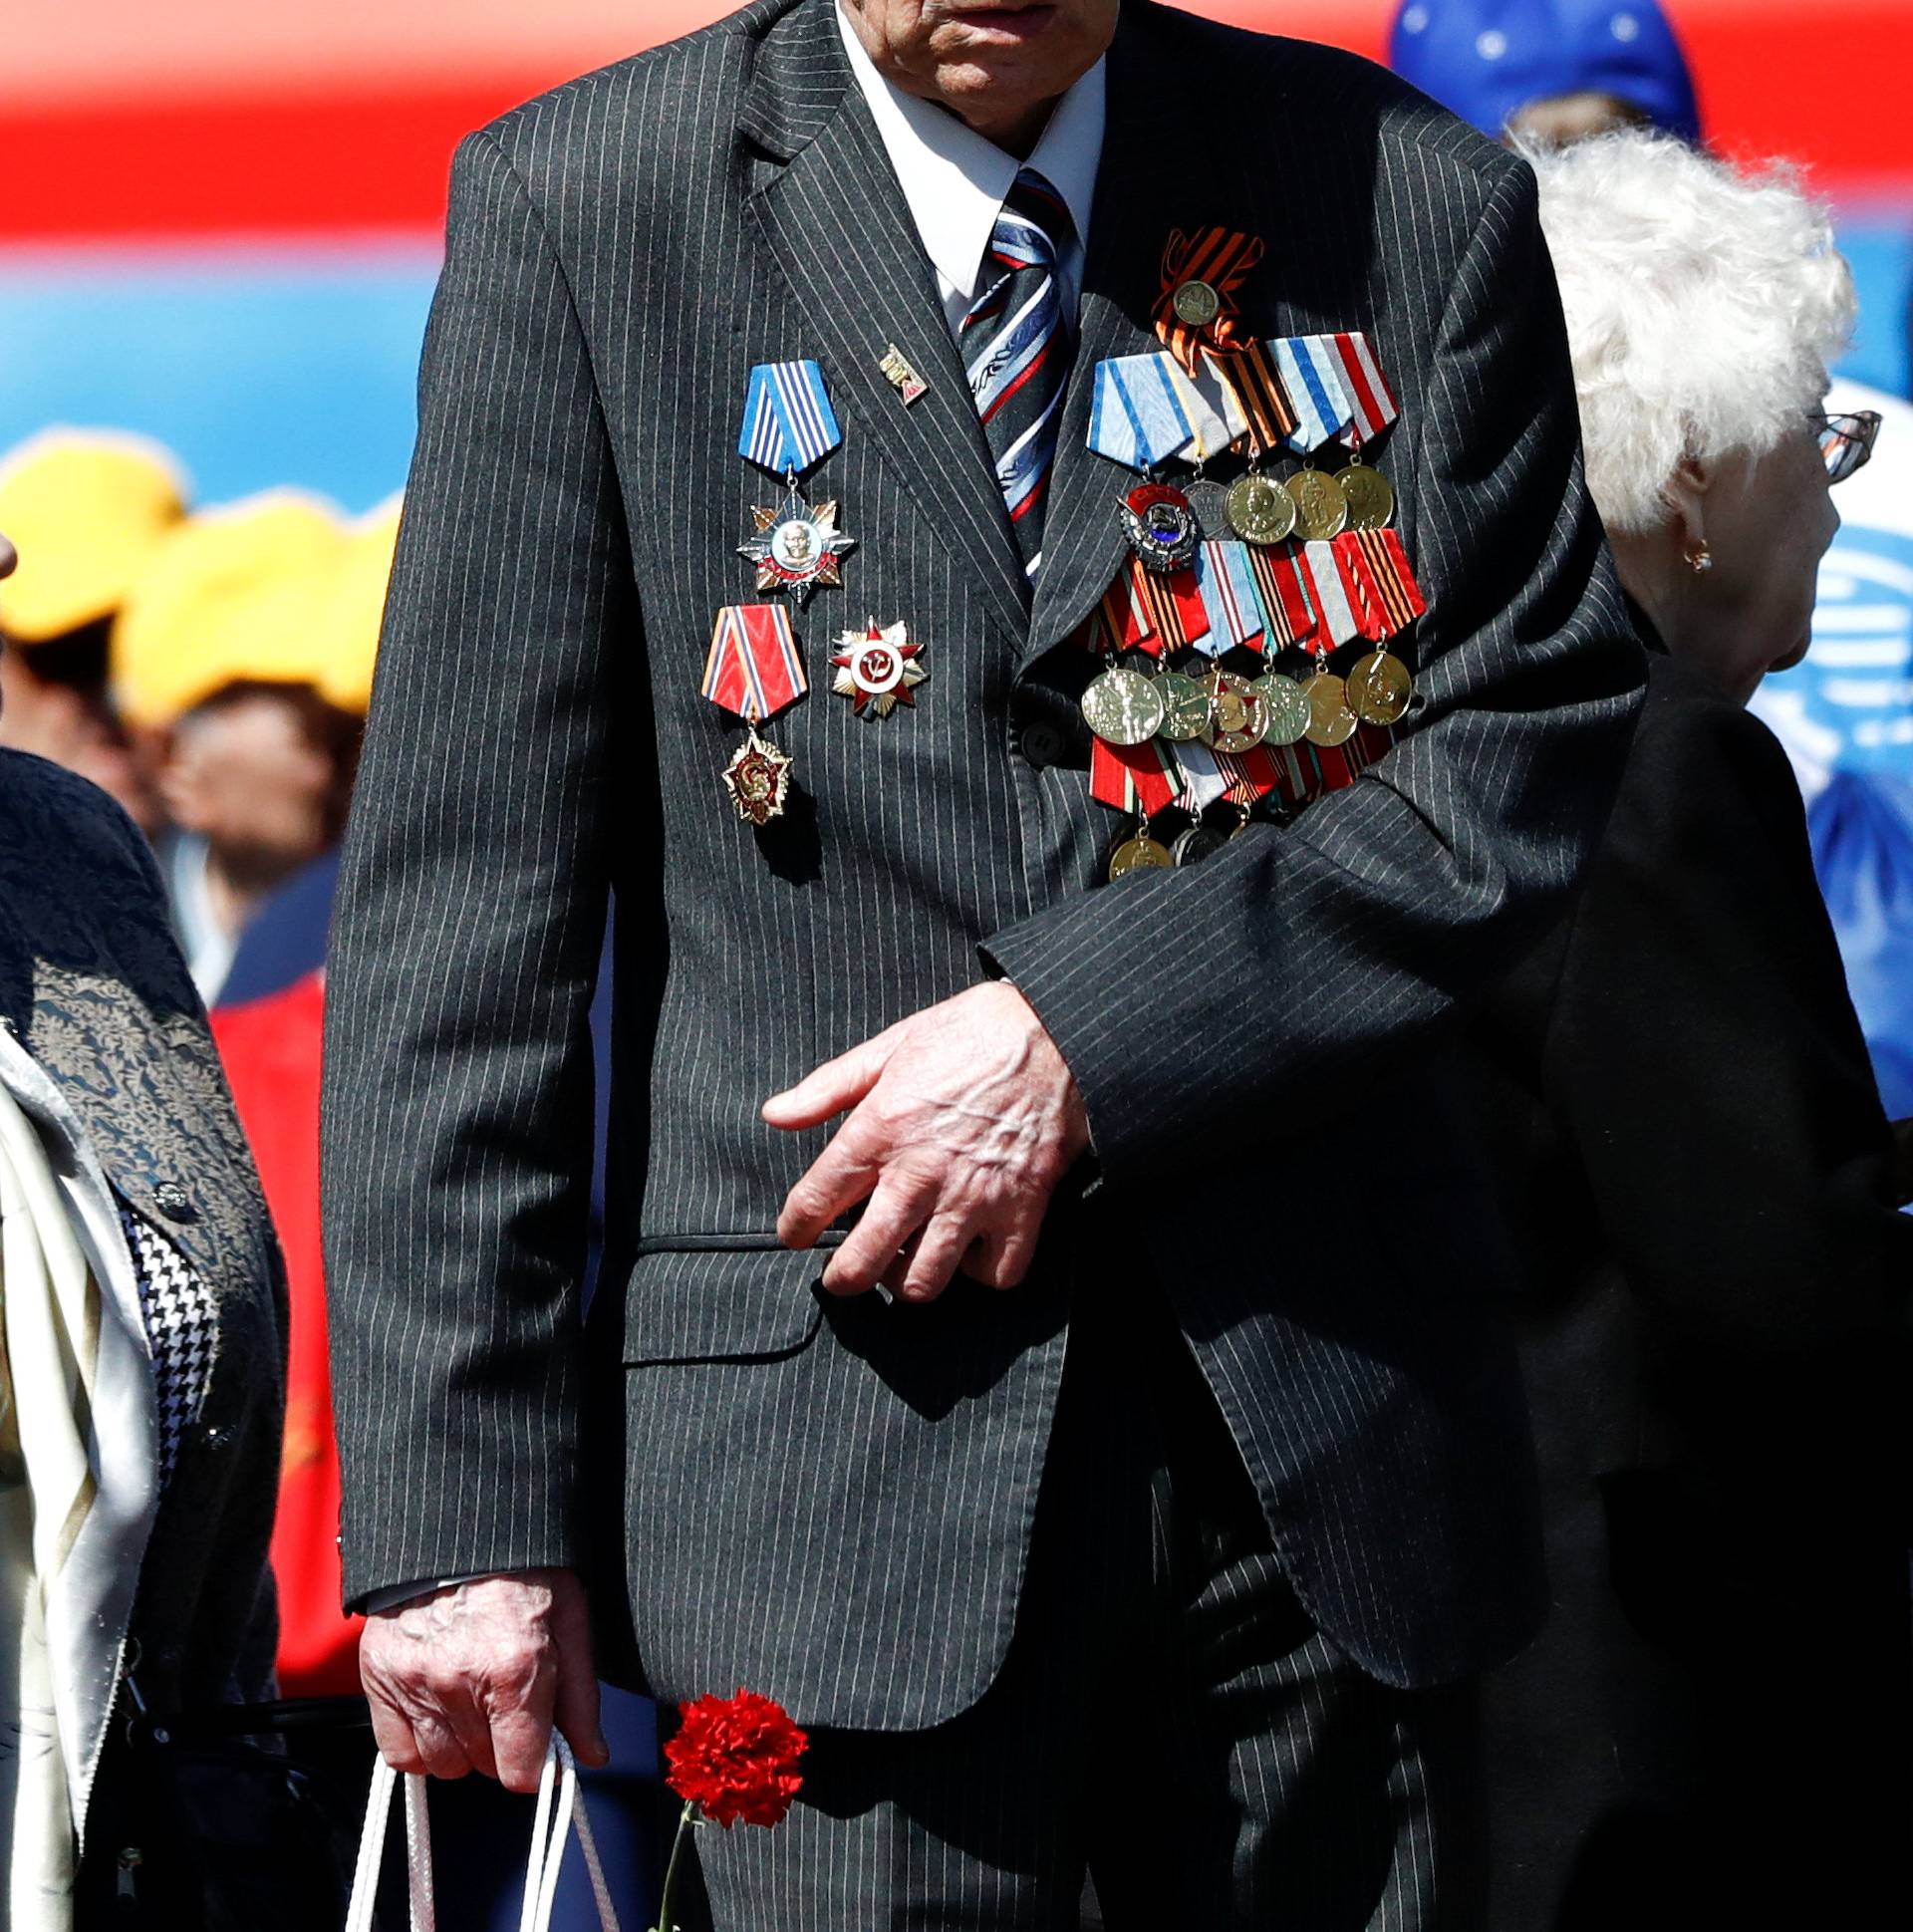 Veterans attend the Victory Day parade at the Red Square in Moscow